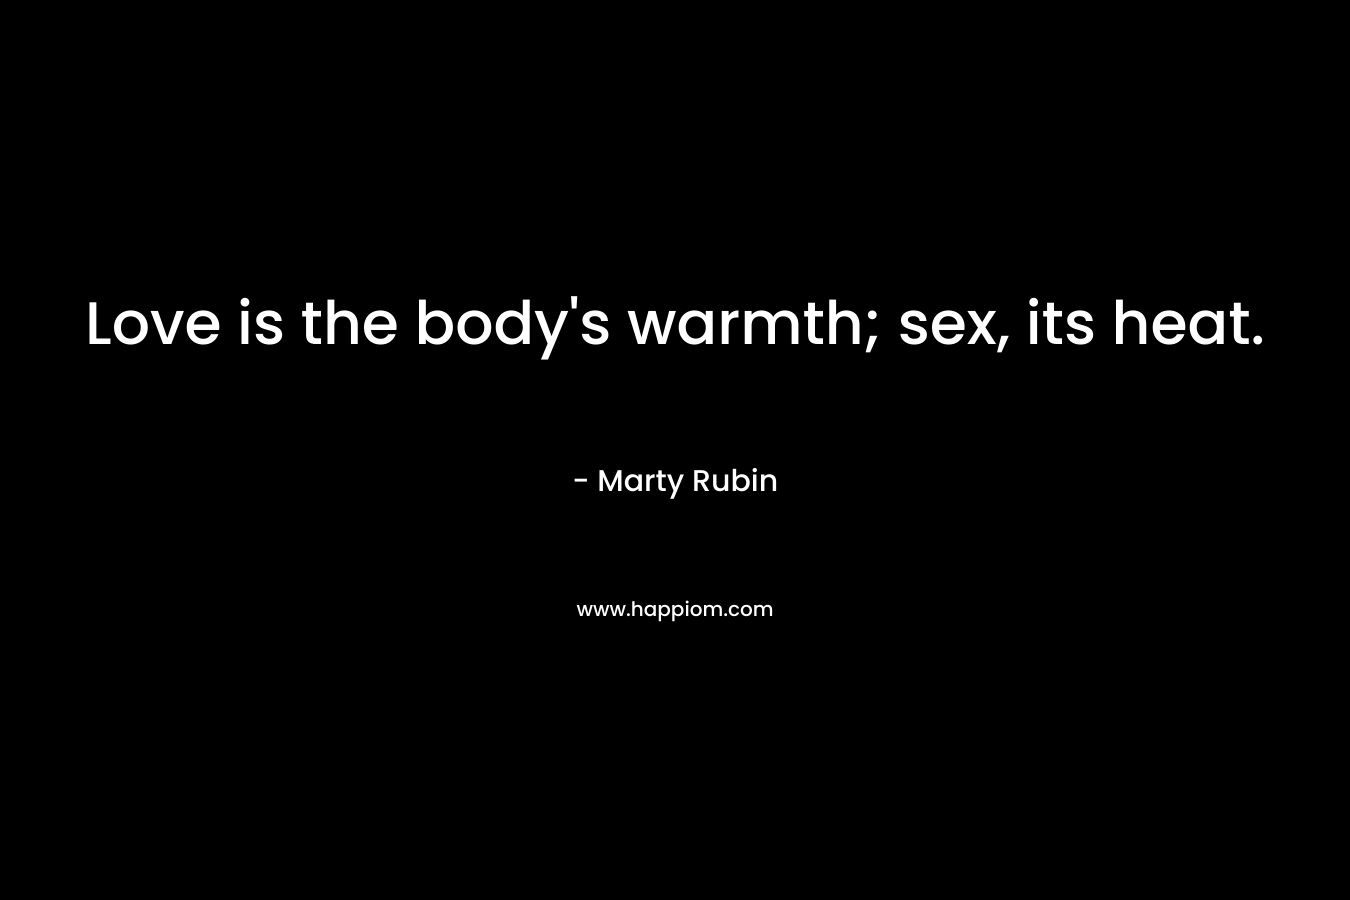 Love is the body's warmth; sex, its heat.